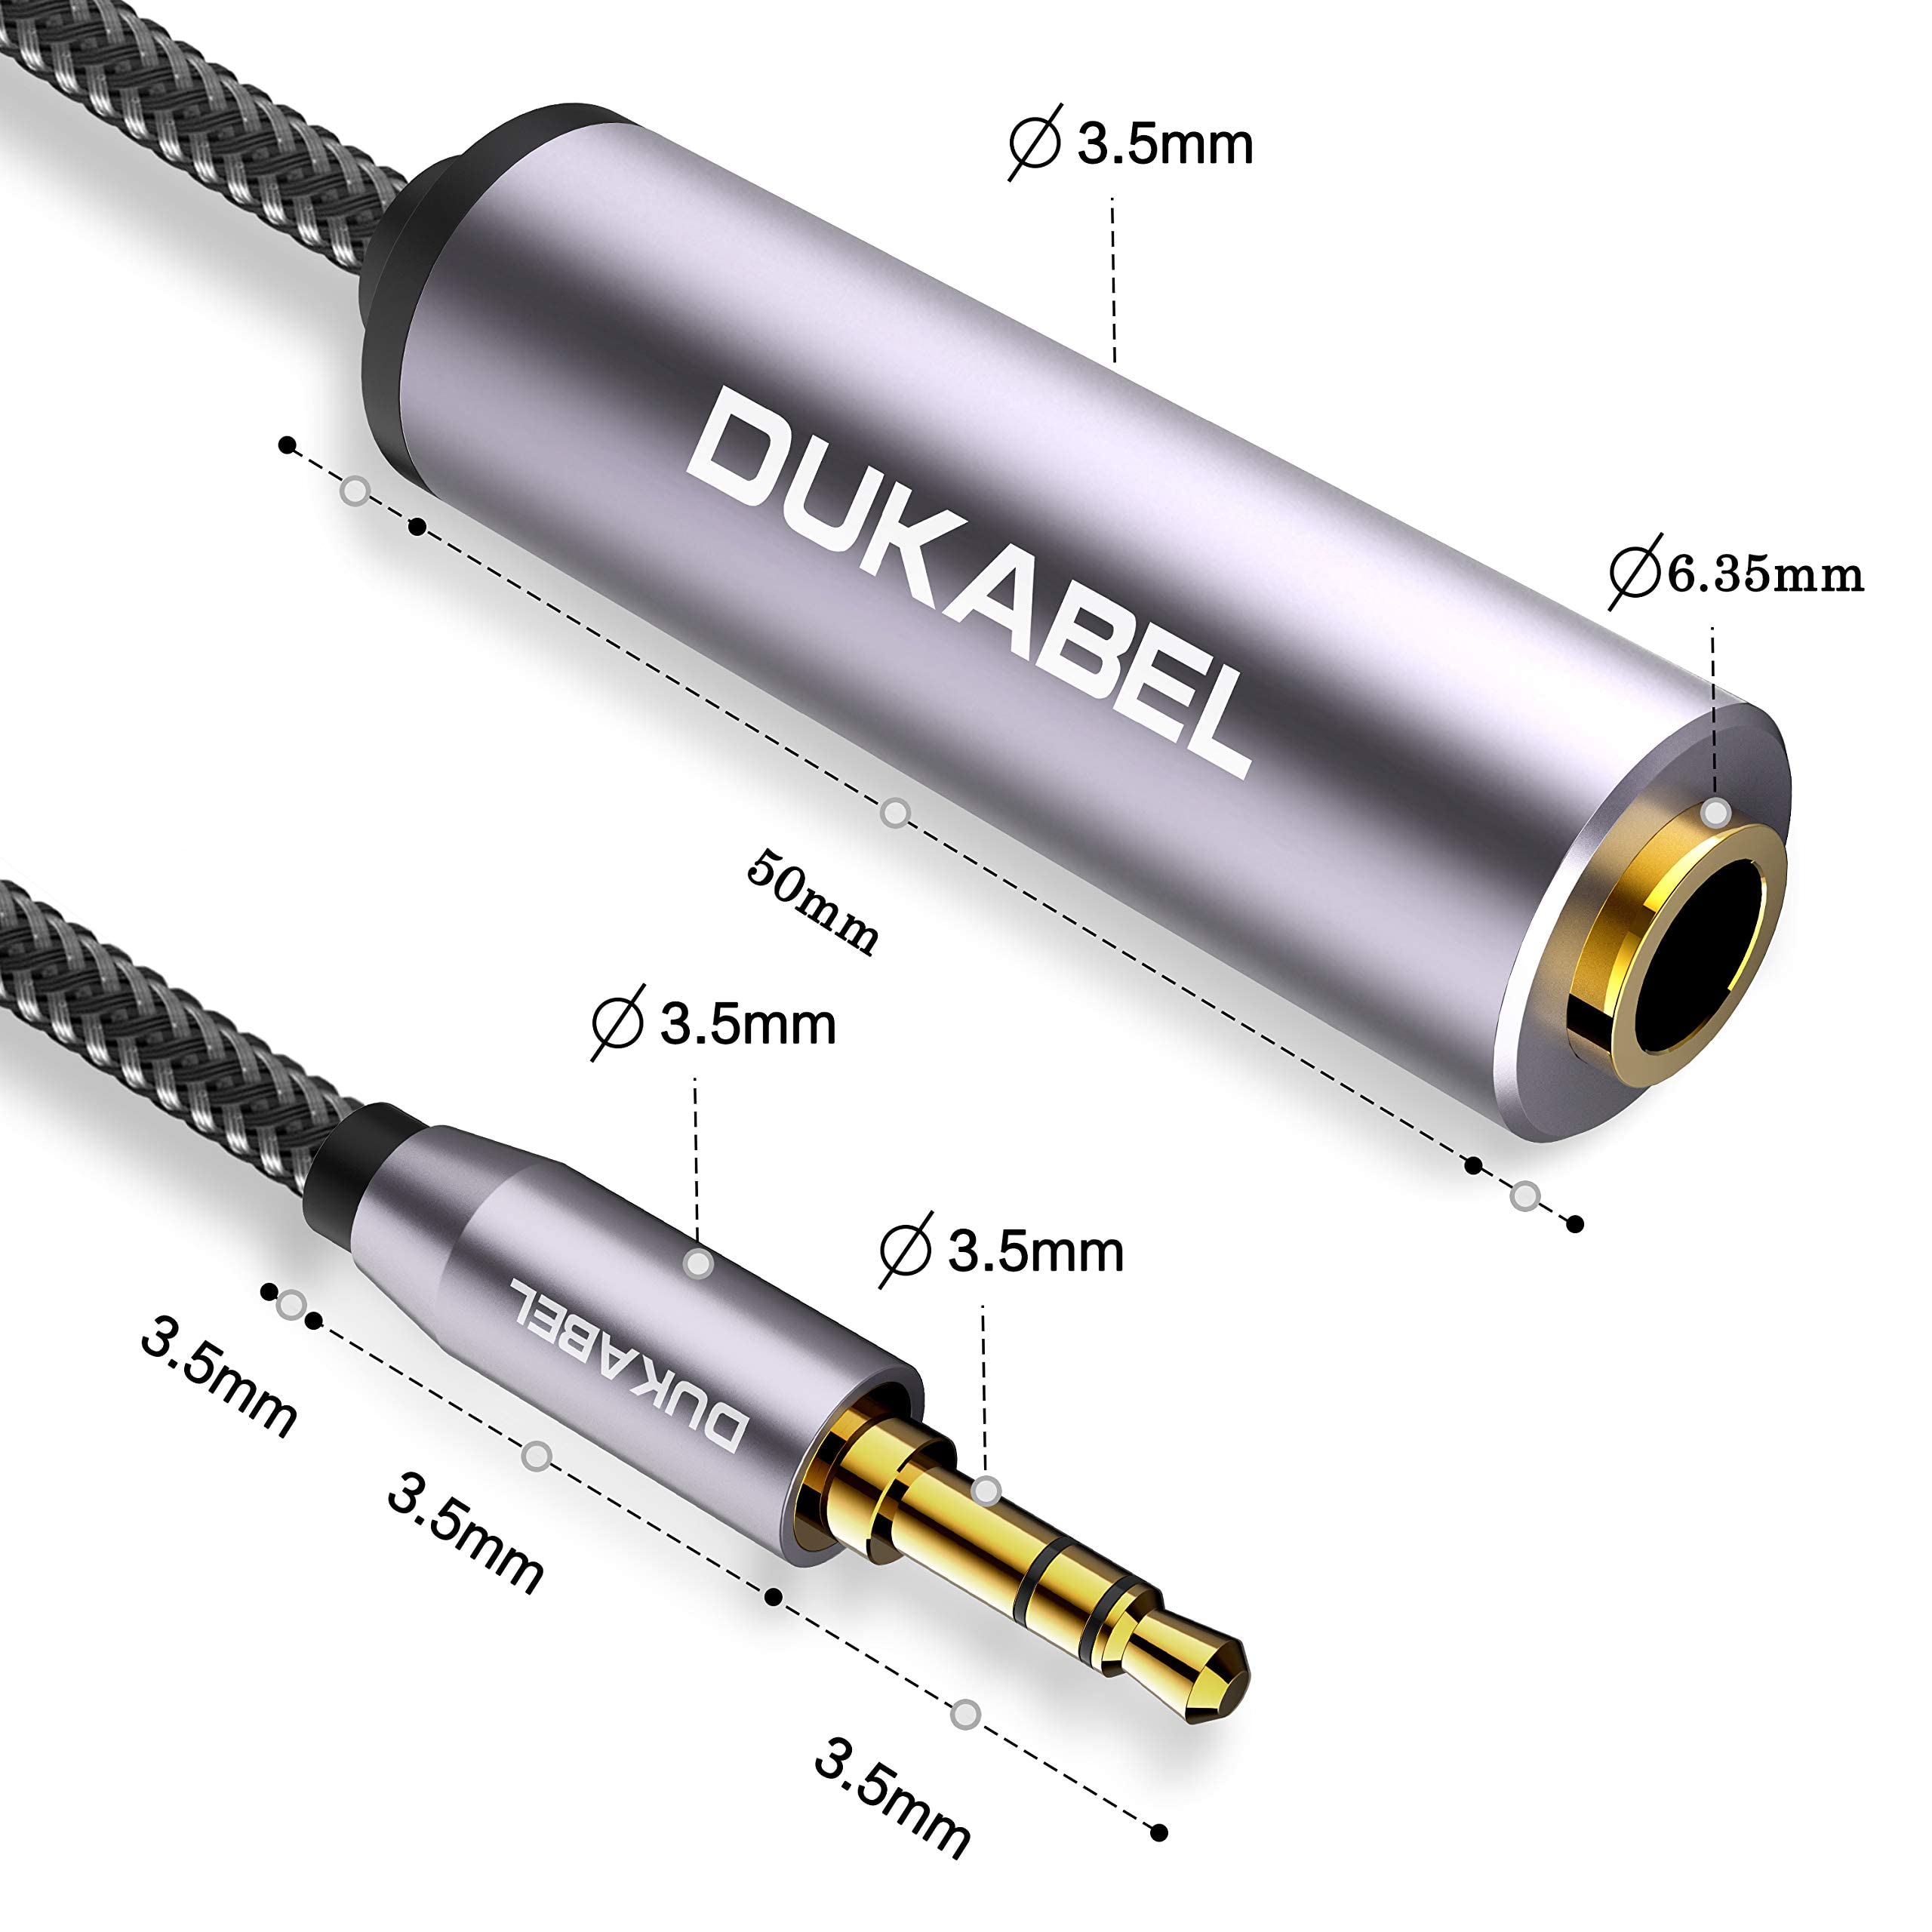 DUKABEL 1/4 to 3.5mm Adapter, 1/4 Inch Female to 3.5mm Male Headphone Adapter, TopSeries 6.35mm to 3.5mm Mini Stereo Adapter for Headphone, Guiter, Amp etc. - 30CM/12 inch